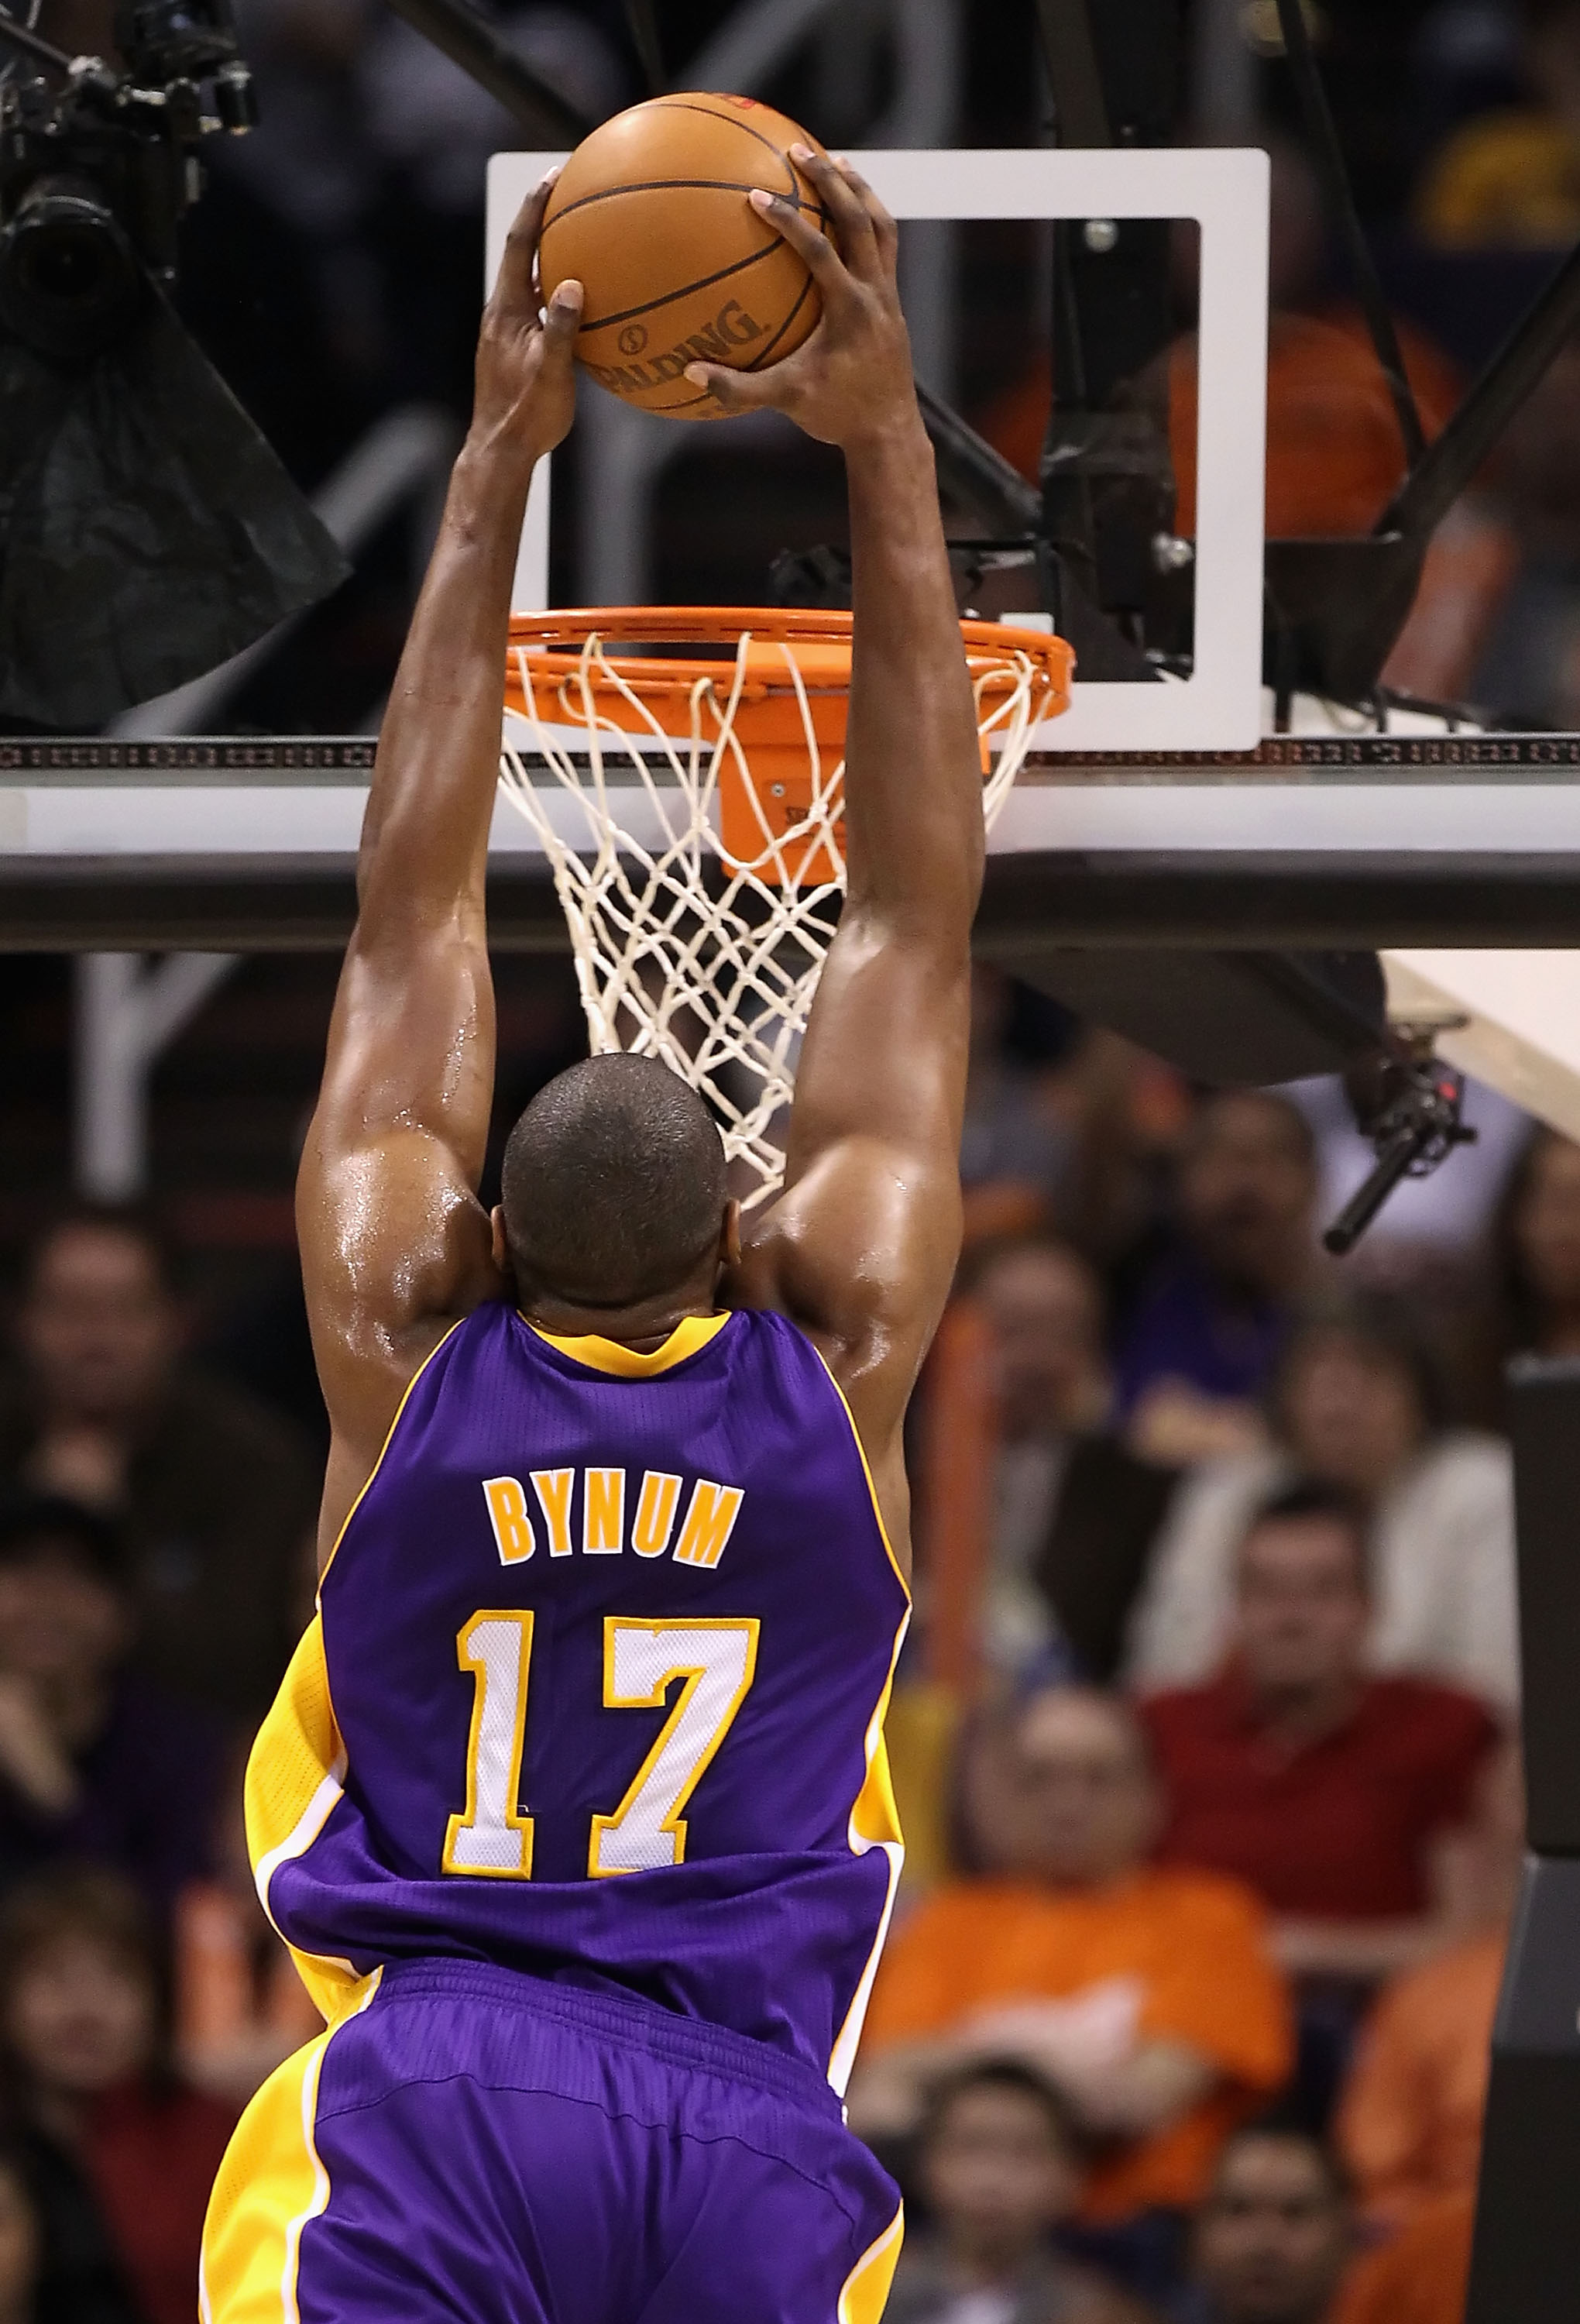 PHOENIX, AZ - JANUARY 05:  Andrew Bynum #17 of the Los Angeles Lakers slam dunks during the NBA game against the Phoenix Suns at US Airways Center on December 23, 2011 in Phoenix, Arizona. The Lakers defeated the Suns 99-95.  NOTE TO USER: User expressly